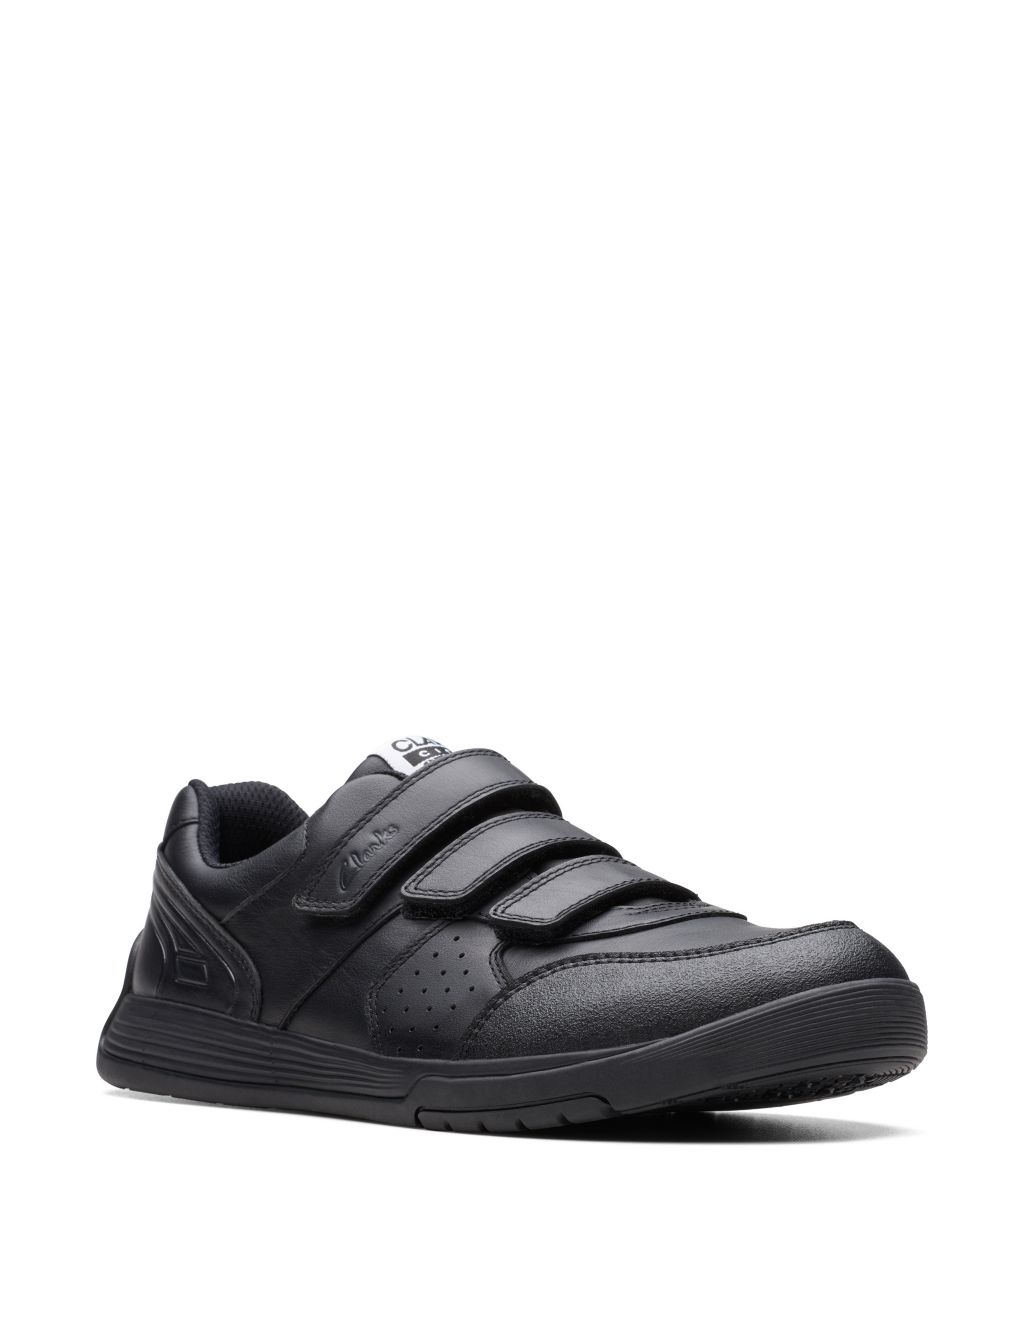 Kids' Leather Riptape Trainers (3 Small - 8 Small) image 2